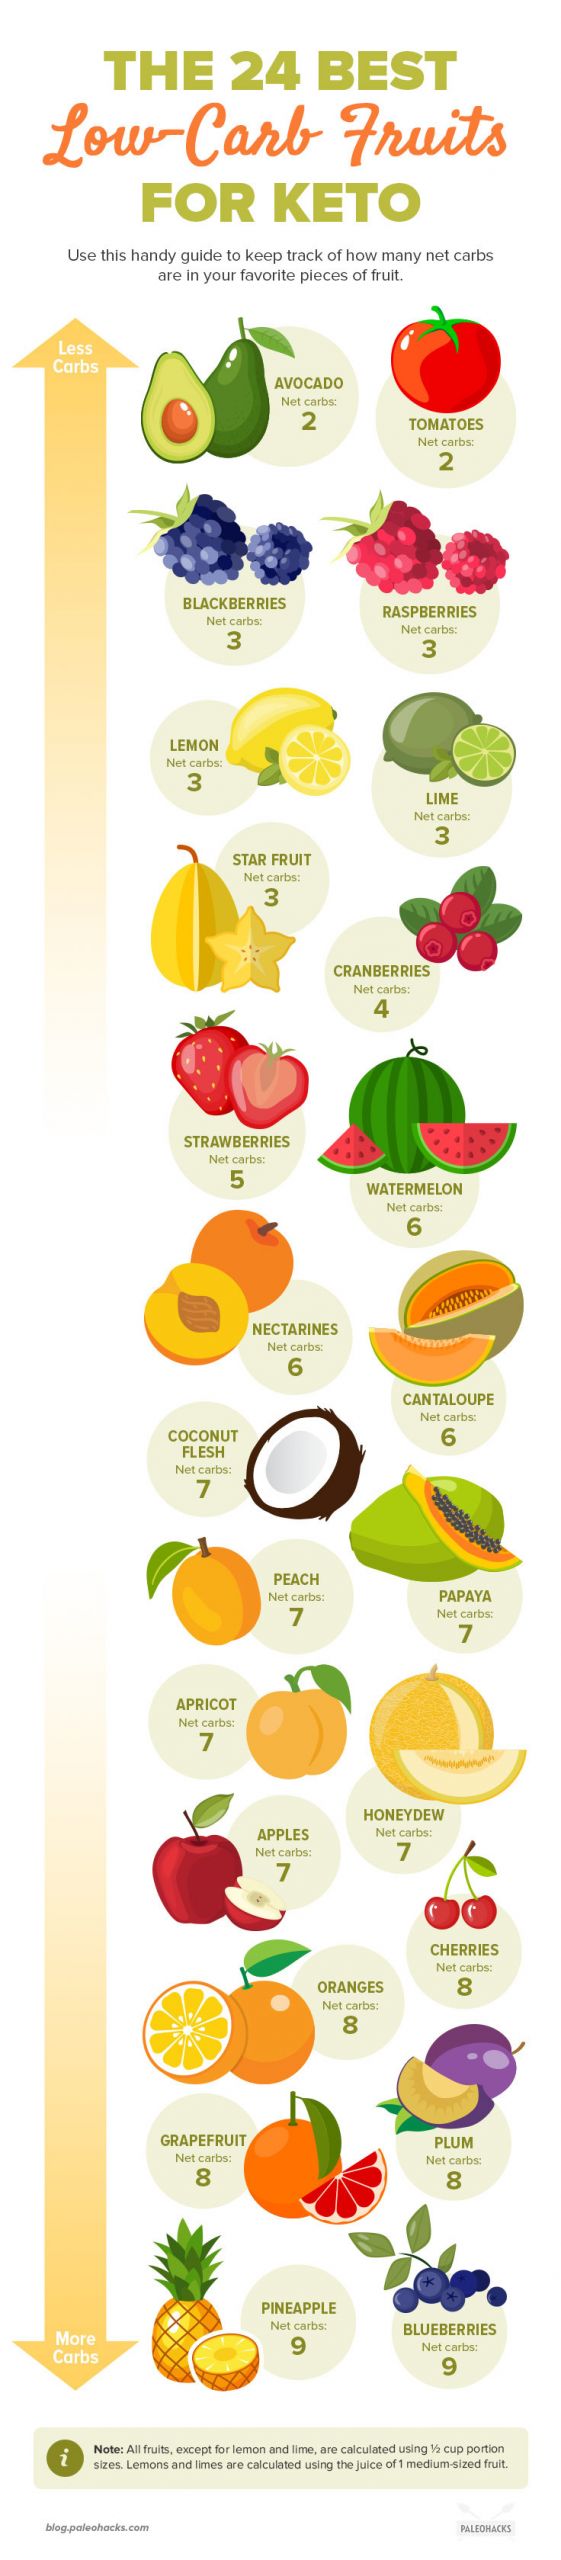 Keto Diet Fruits
 The 24 Best Low Carb Fruits for Keto